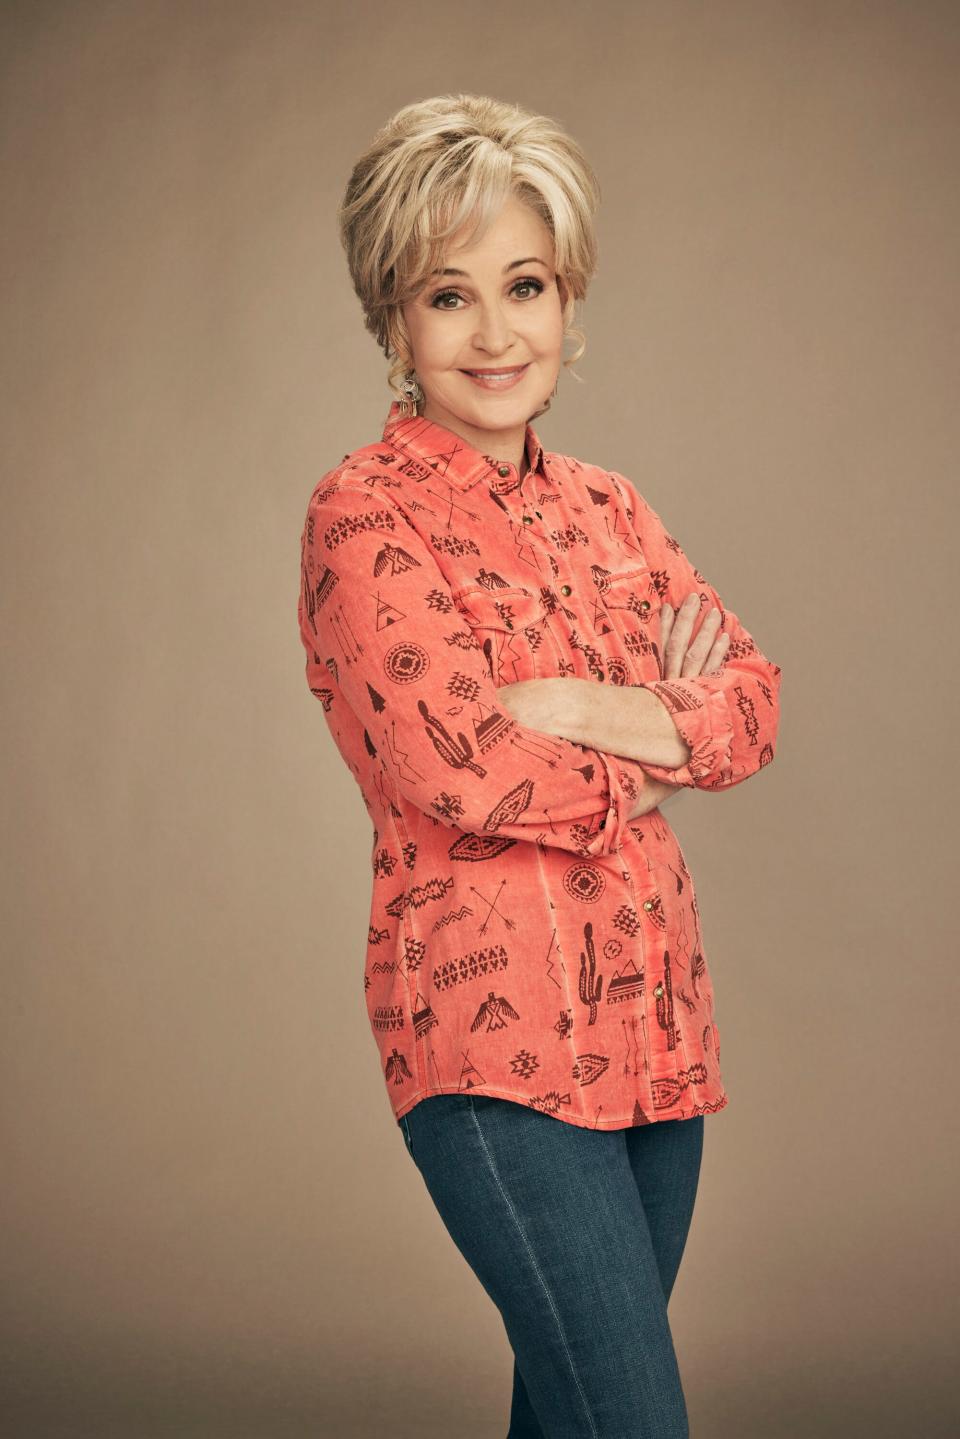 Annie Potts as Meemaw from the CBS Original Series YOUNG SHELDON, scheduled to air on the CBS Television Network.